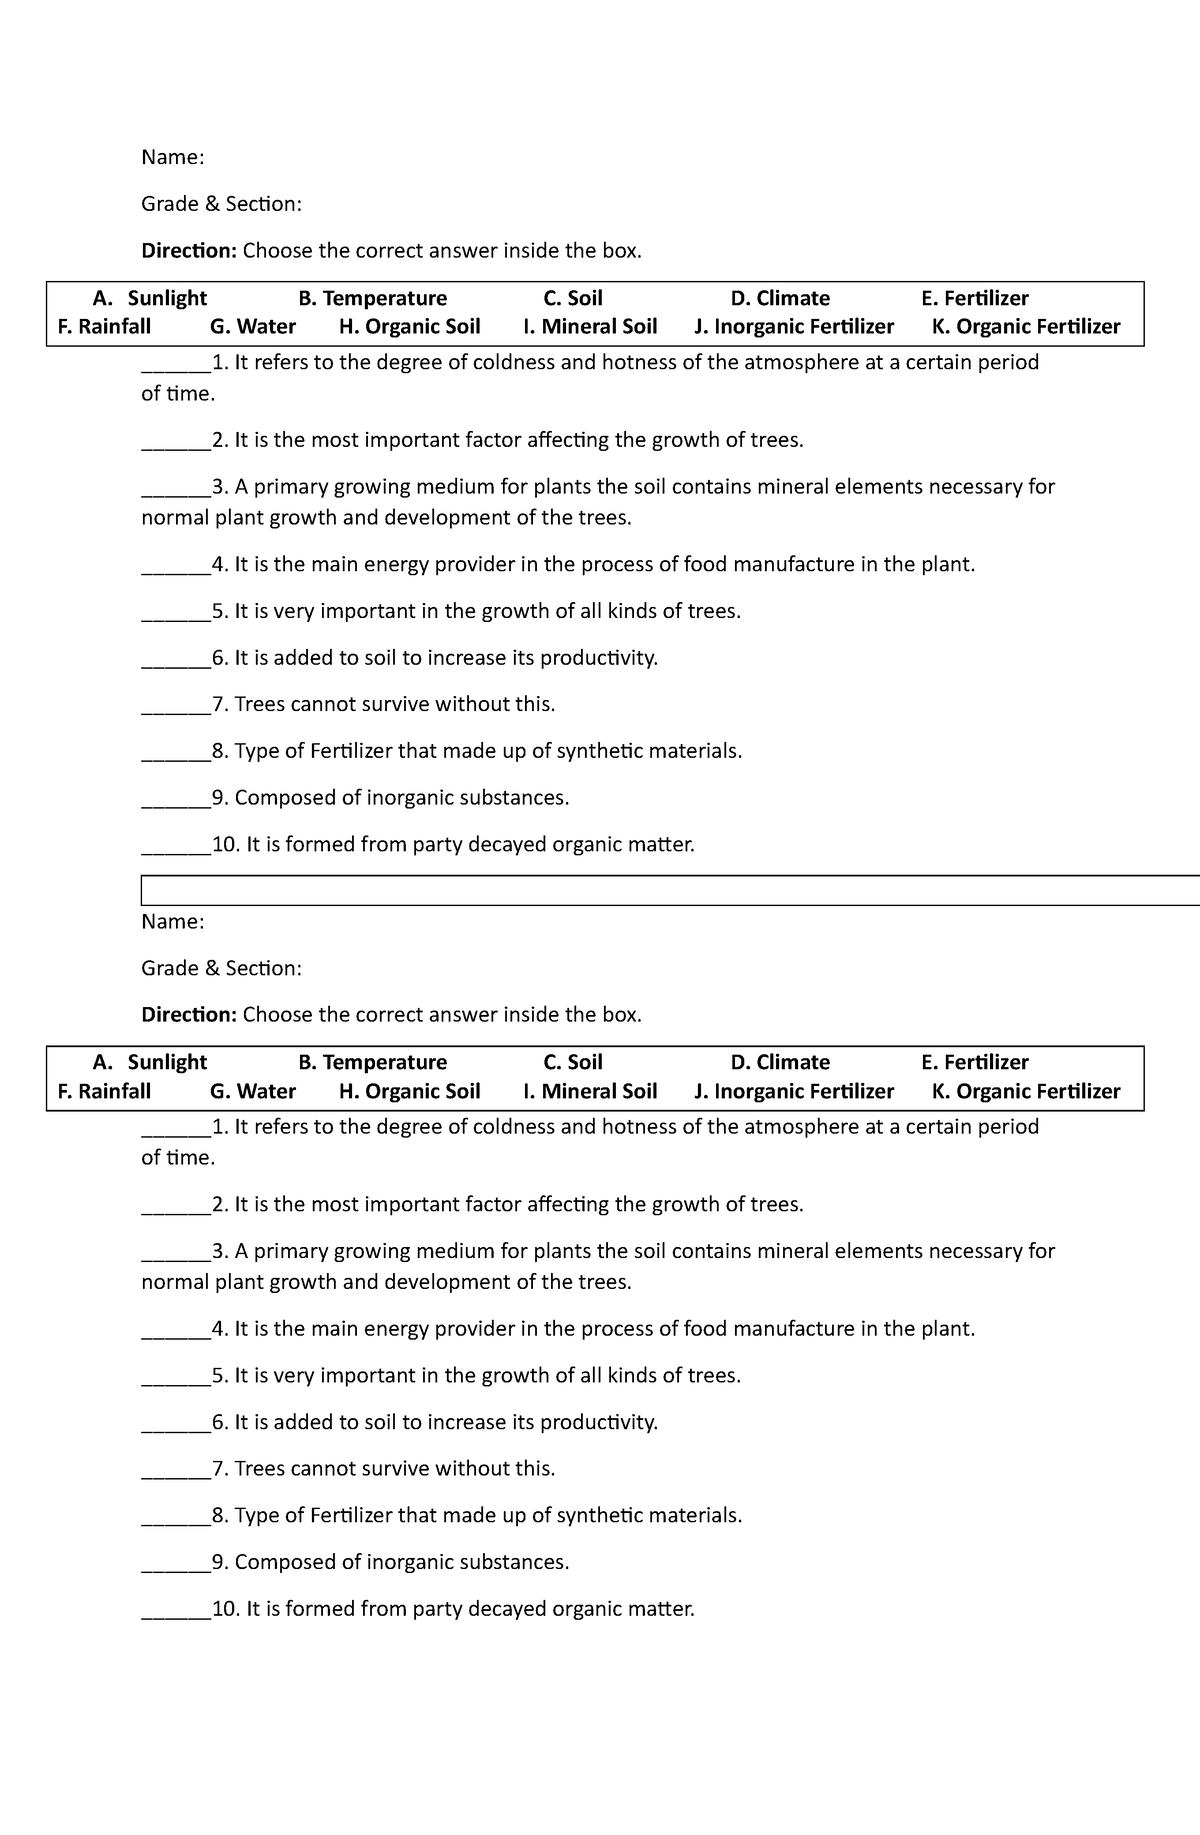 Activity- Sheet-TLE6 - pppppppp - Name: Grade & Section: Direction ...